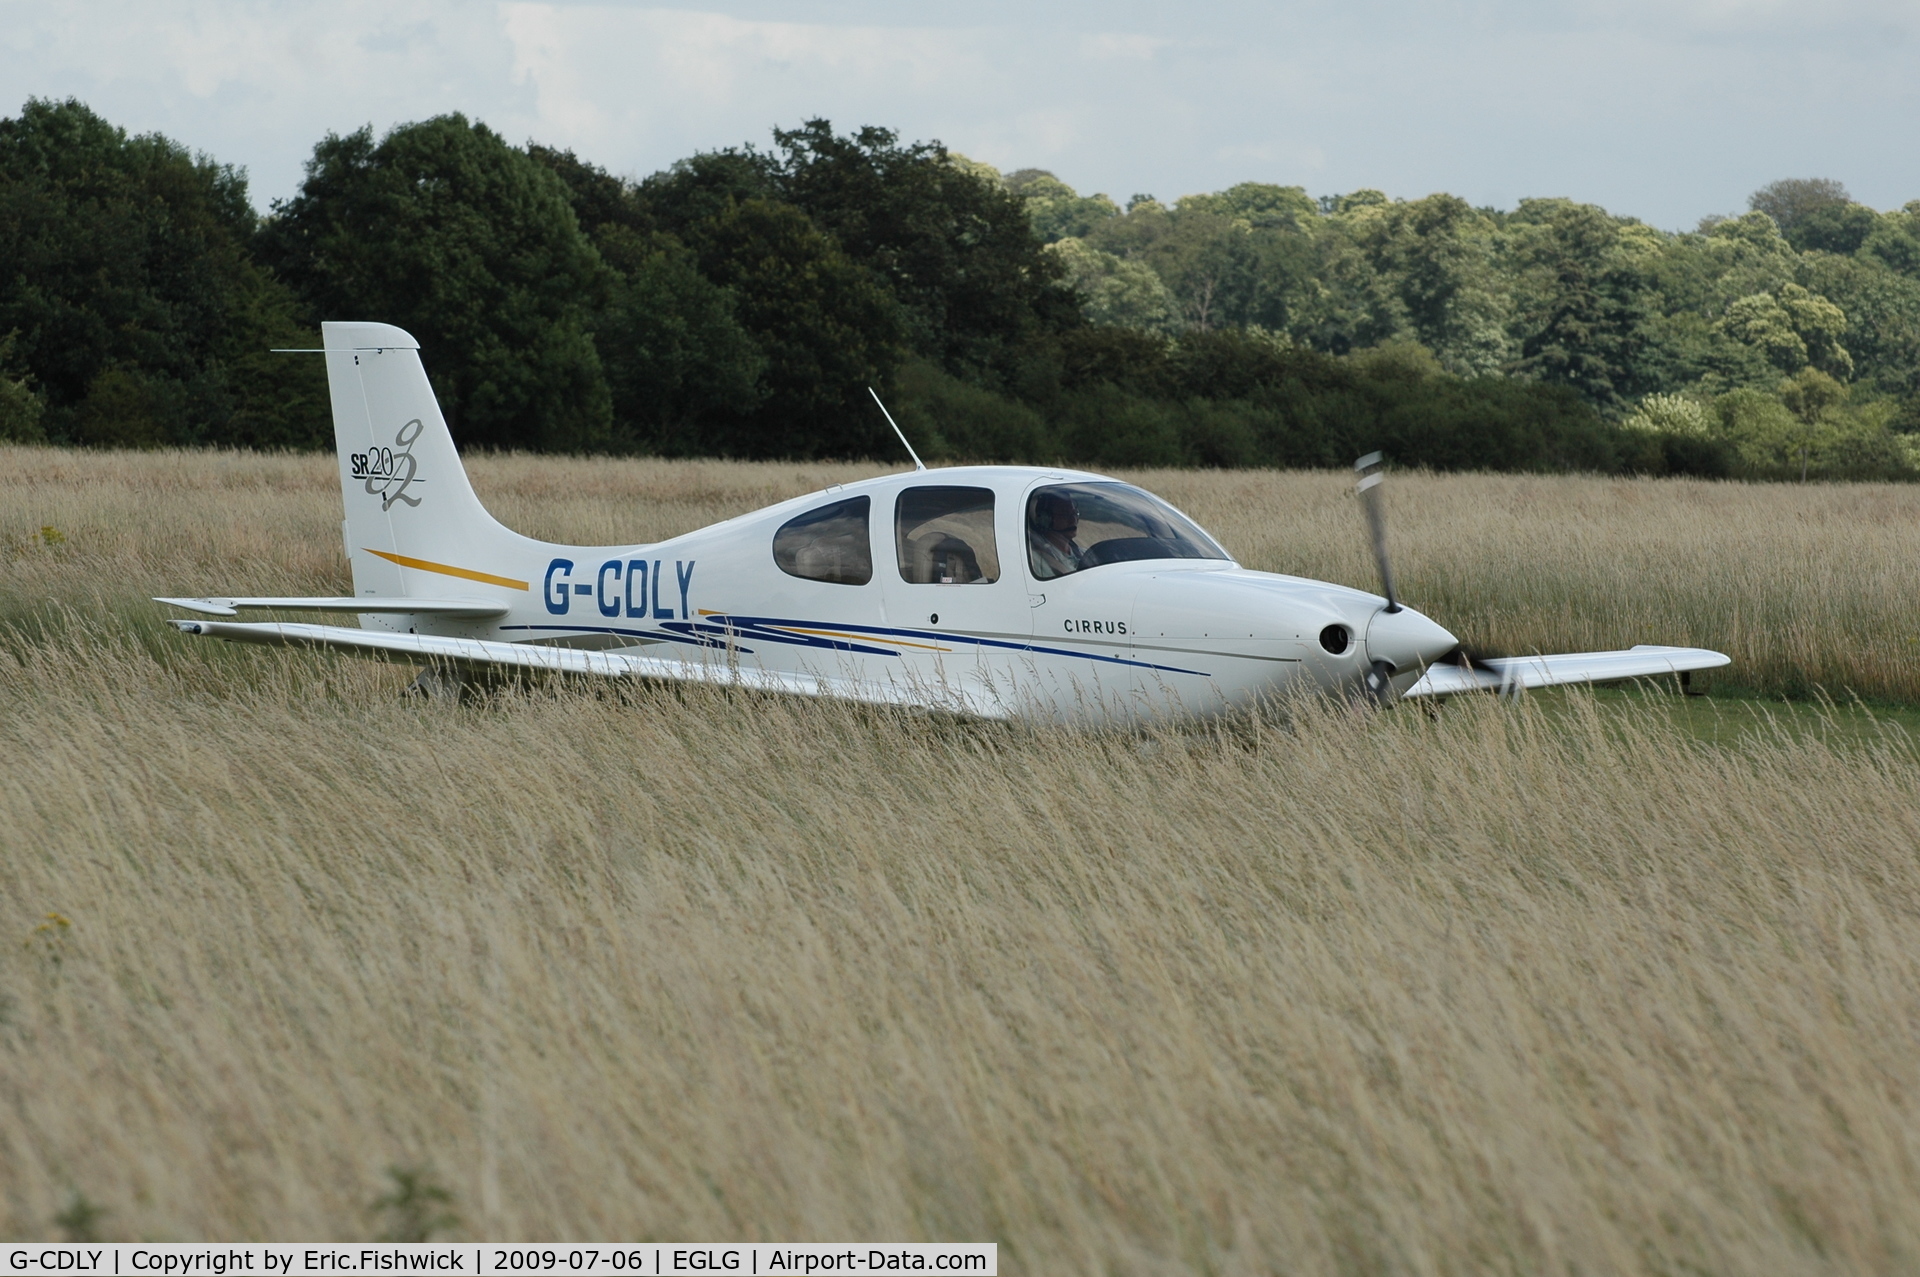 G-CDLY, 2005 Cirrus SR20 G2 C/N 1519, G-CDLY arriving at Panshanger Airfield. Is the long grass to encourage wildlife ?